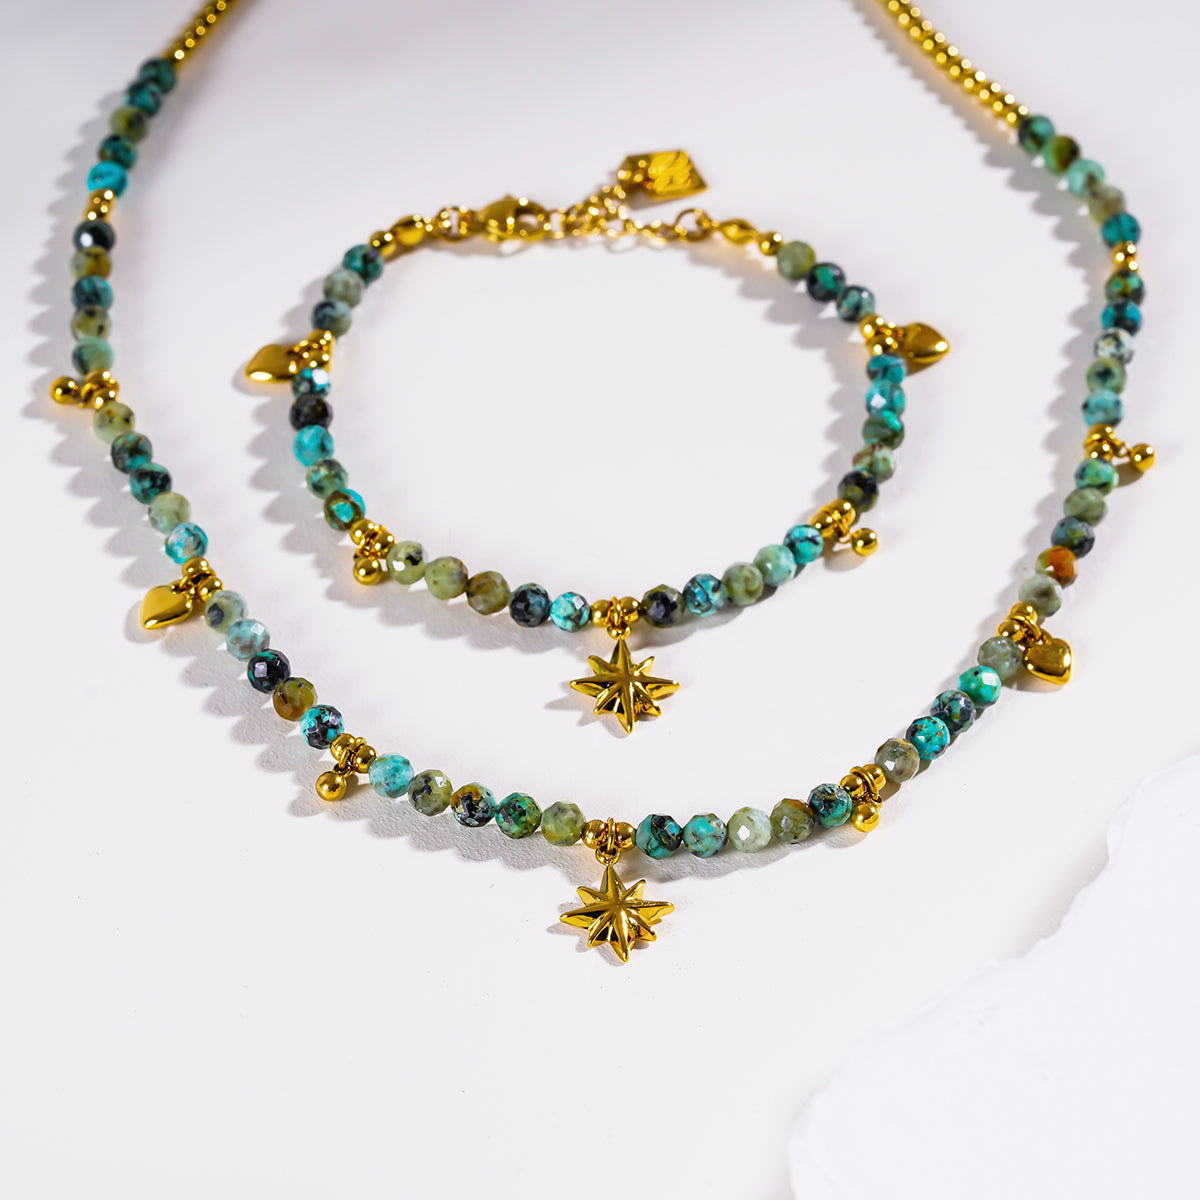 GITANJI: Blue Turquoise Stones with Gold Beads & Charms Chain Necklace